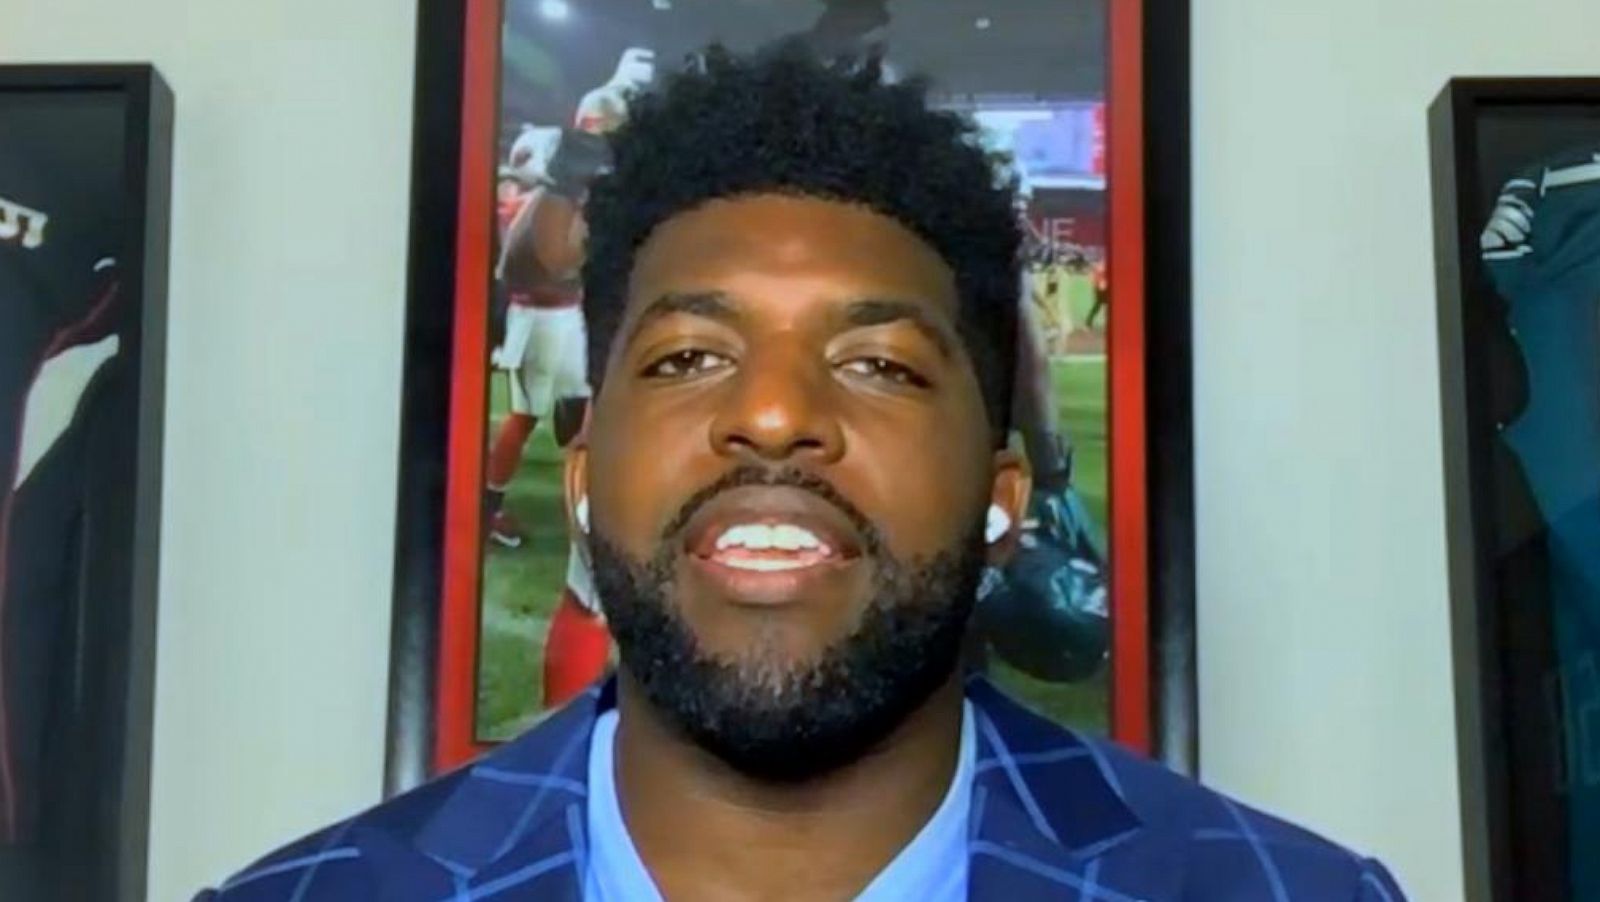 PHOTO: Emmanuel Acho is tackling tough conversations about race in America in his new YouTube series, "Uncomfortable Conversations with a Black Man."